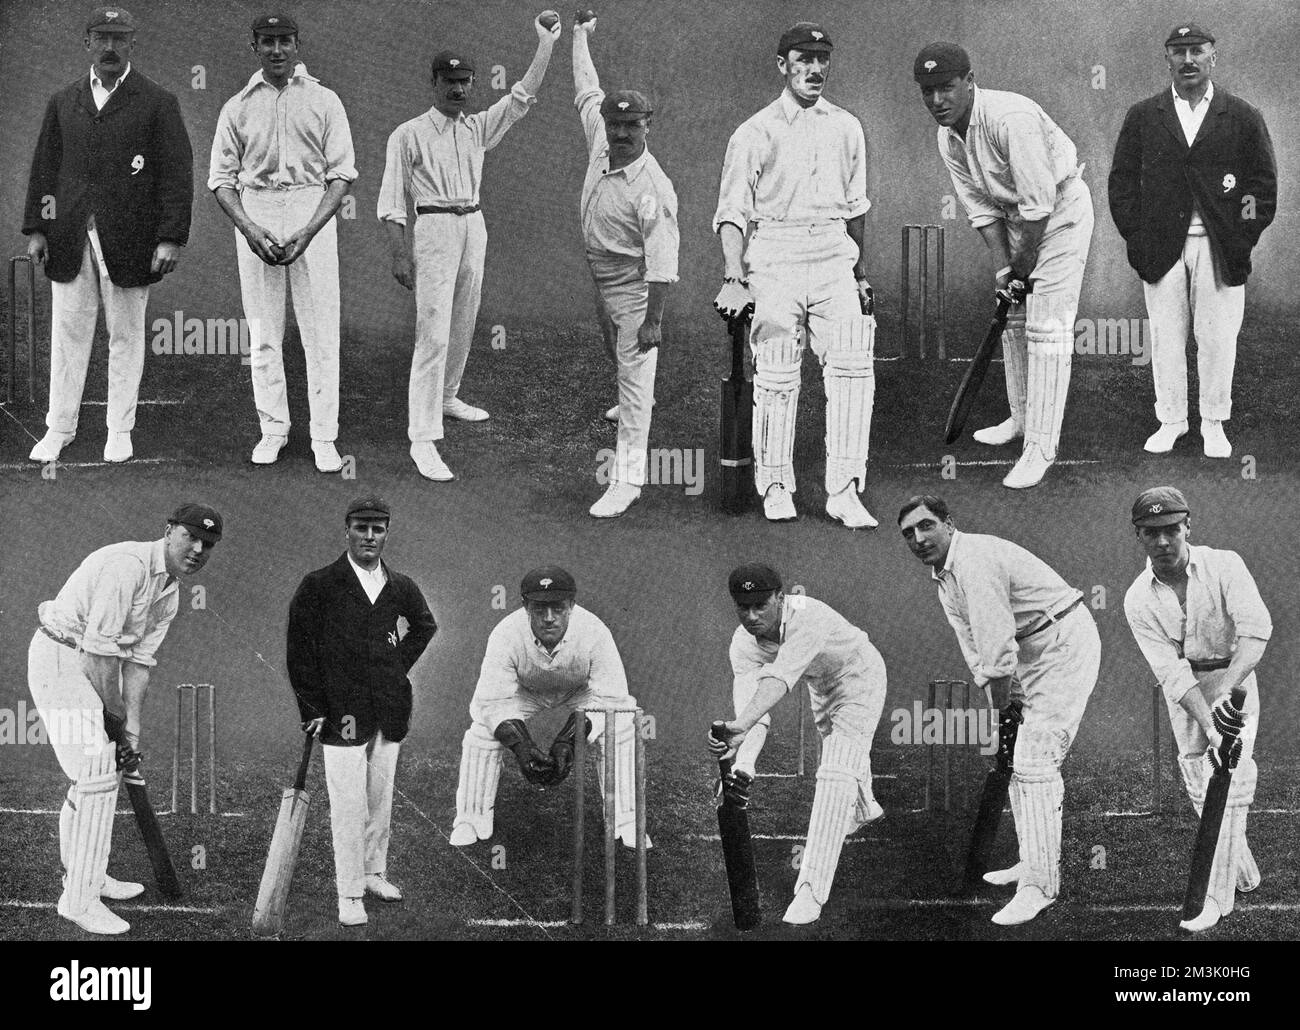 Photograph showing 13 members of the Yorkshire County Cricket team for the 1912 season. Yorkshire were winners of the County Championship that year.  Top row, left to right: Sir A.W. White (captain), M.W. Booth, D. Denton, S. Haigh, W. Rhodes, W.E. Bates, G.H. Hirst.  Bottom row, left to right: A. Drake, R. Kilner, A. Dolphin, J. Tasker, B.B. Wilson, E. Oldroyd.  1912 Stock Photo